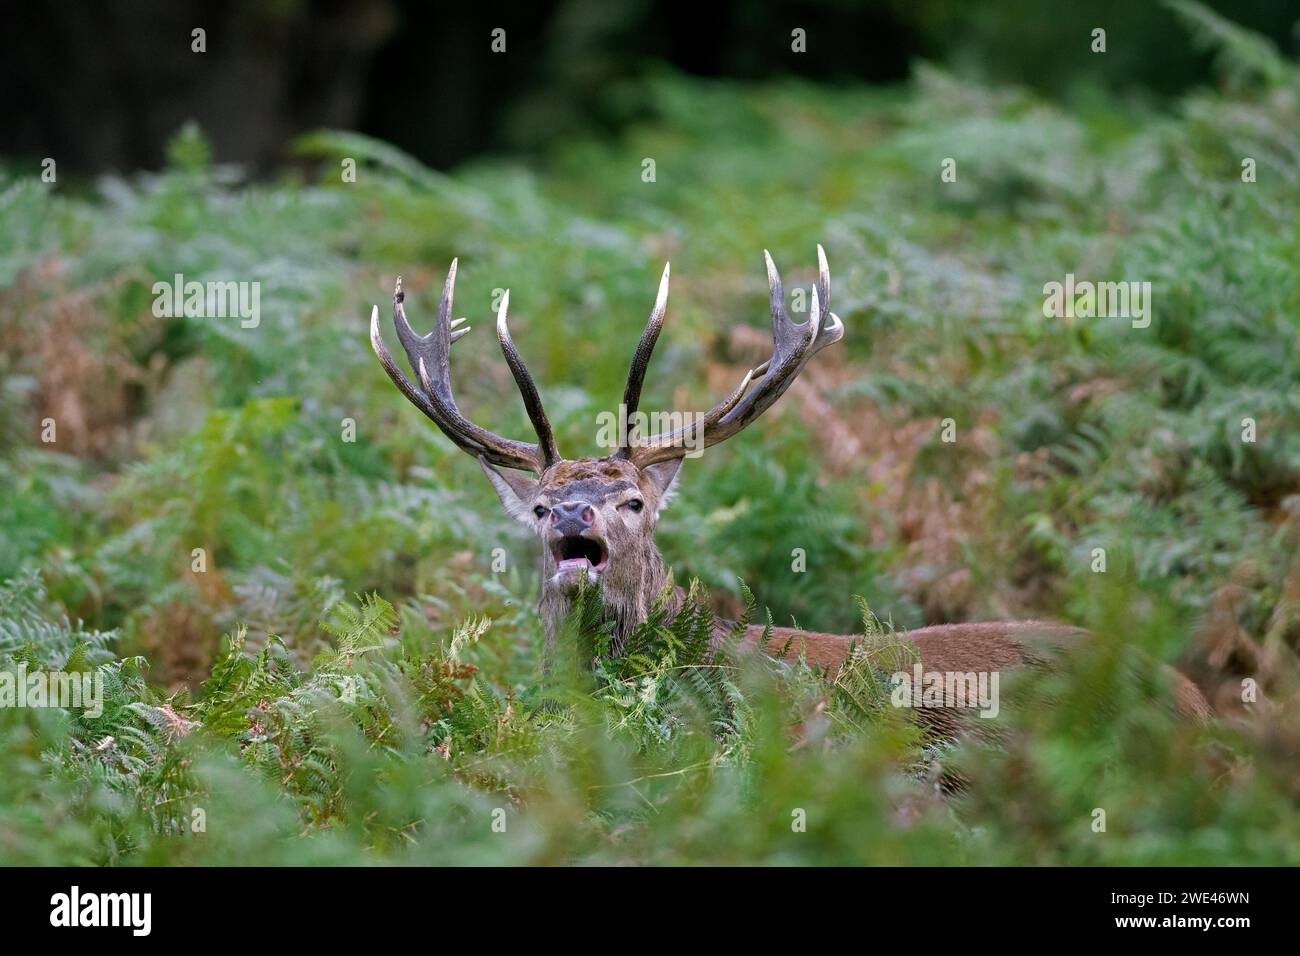 Red deer (Cervus elaphus) stag standing among bracken ferns while bellowing in forest during the rut in autumn / fall Stock Photo